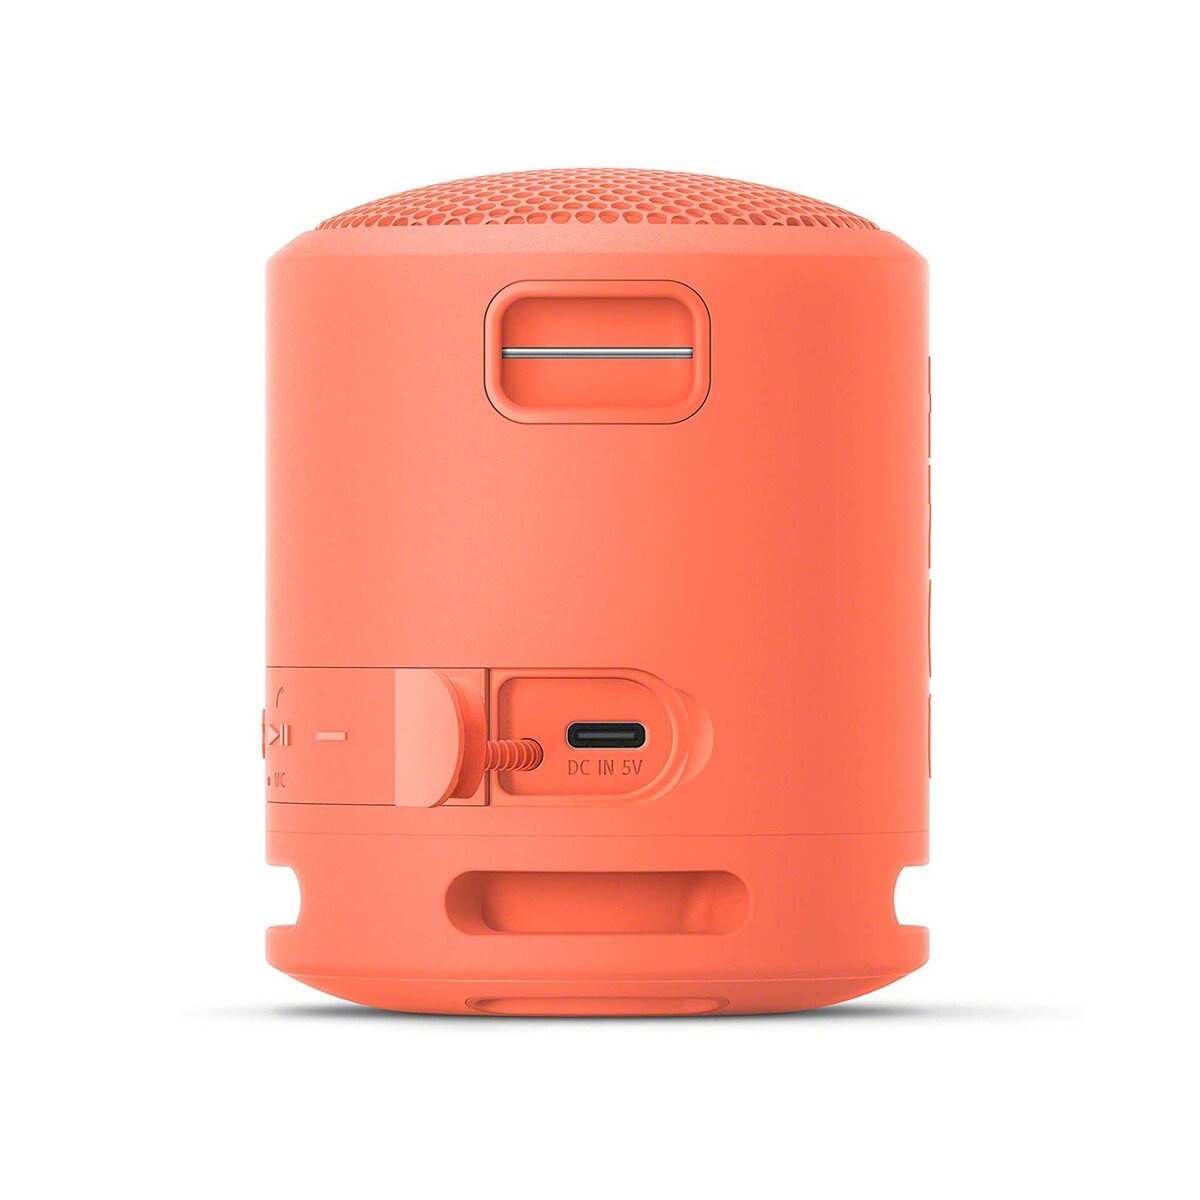 Sony SRS-XB13 Extra BASS Wireless Portable Speaker IP67 Waterproof Bluetooth, Coral  Pink